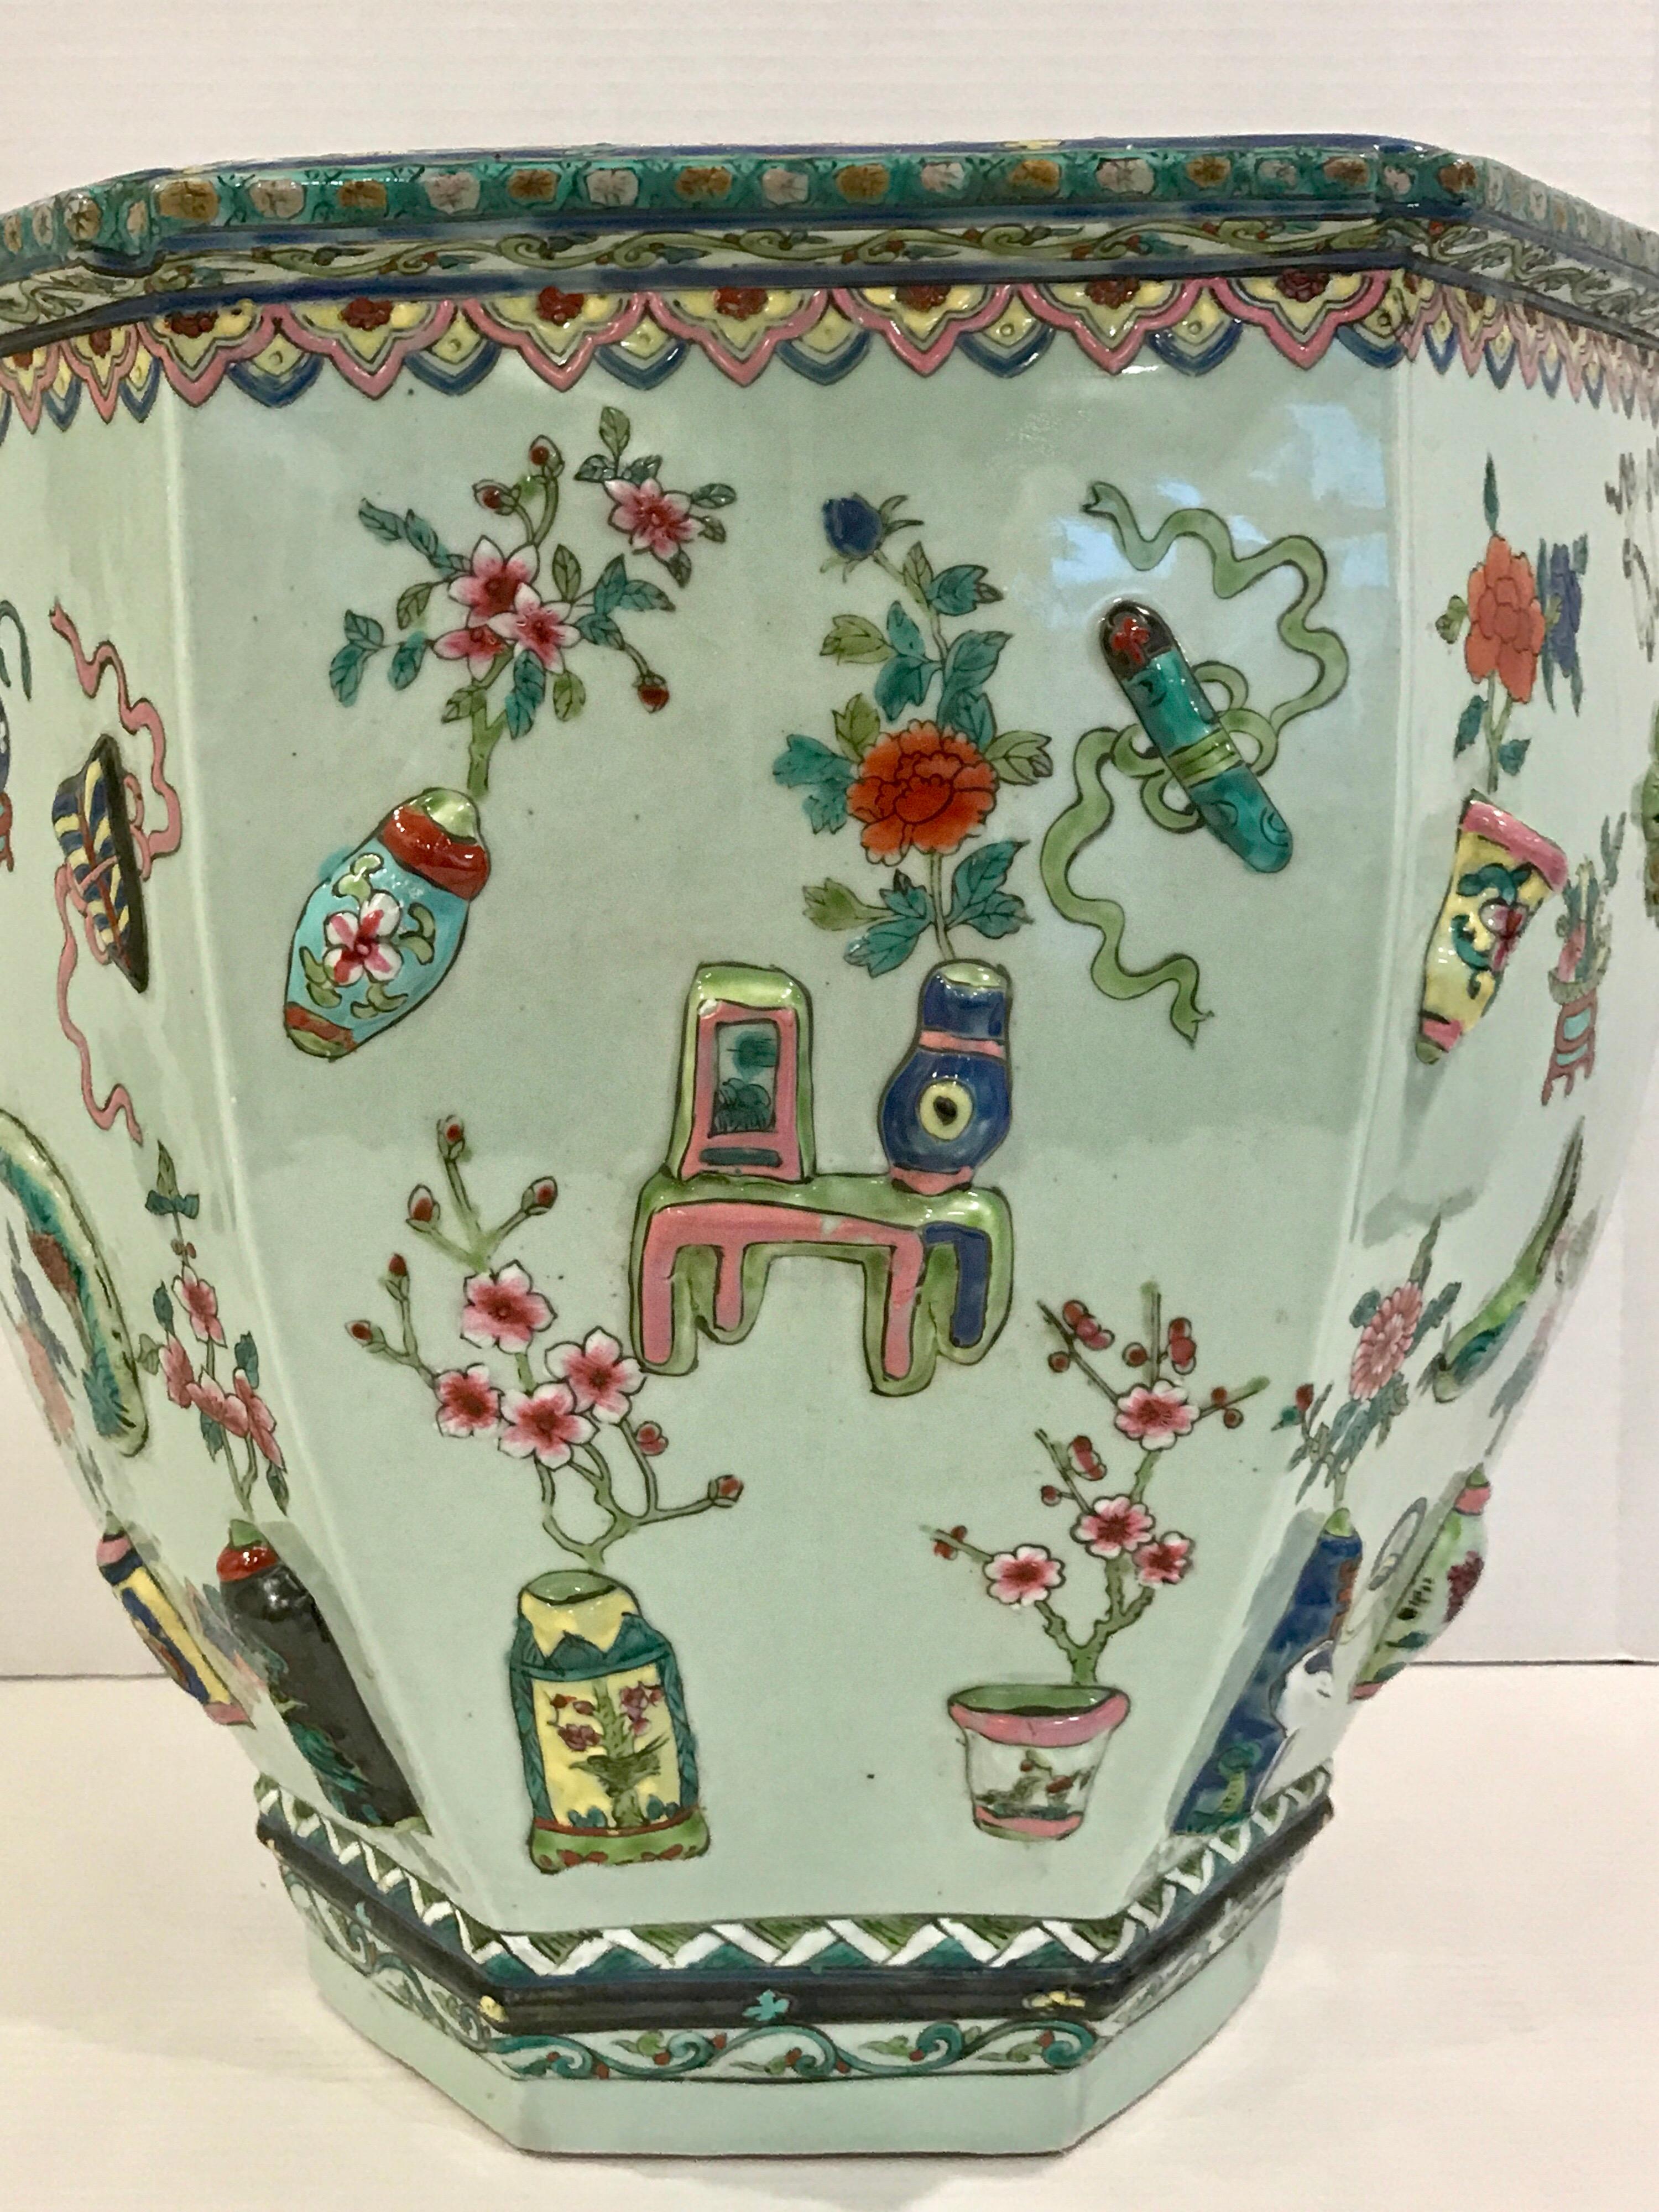 Pair of Chinese export Famille Verte each one with typical applied decoration of vases, flowers, and scholars objects, finely painted, with reign marks on the 9